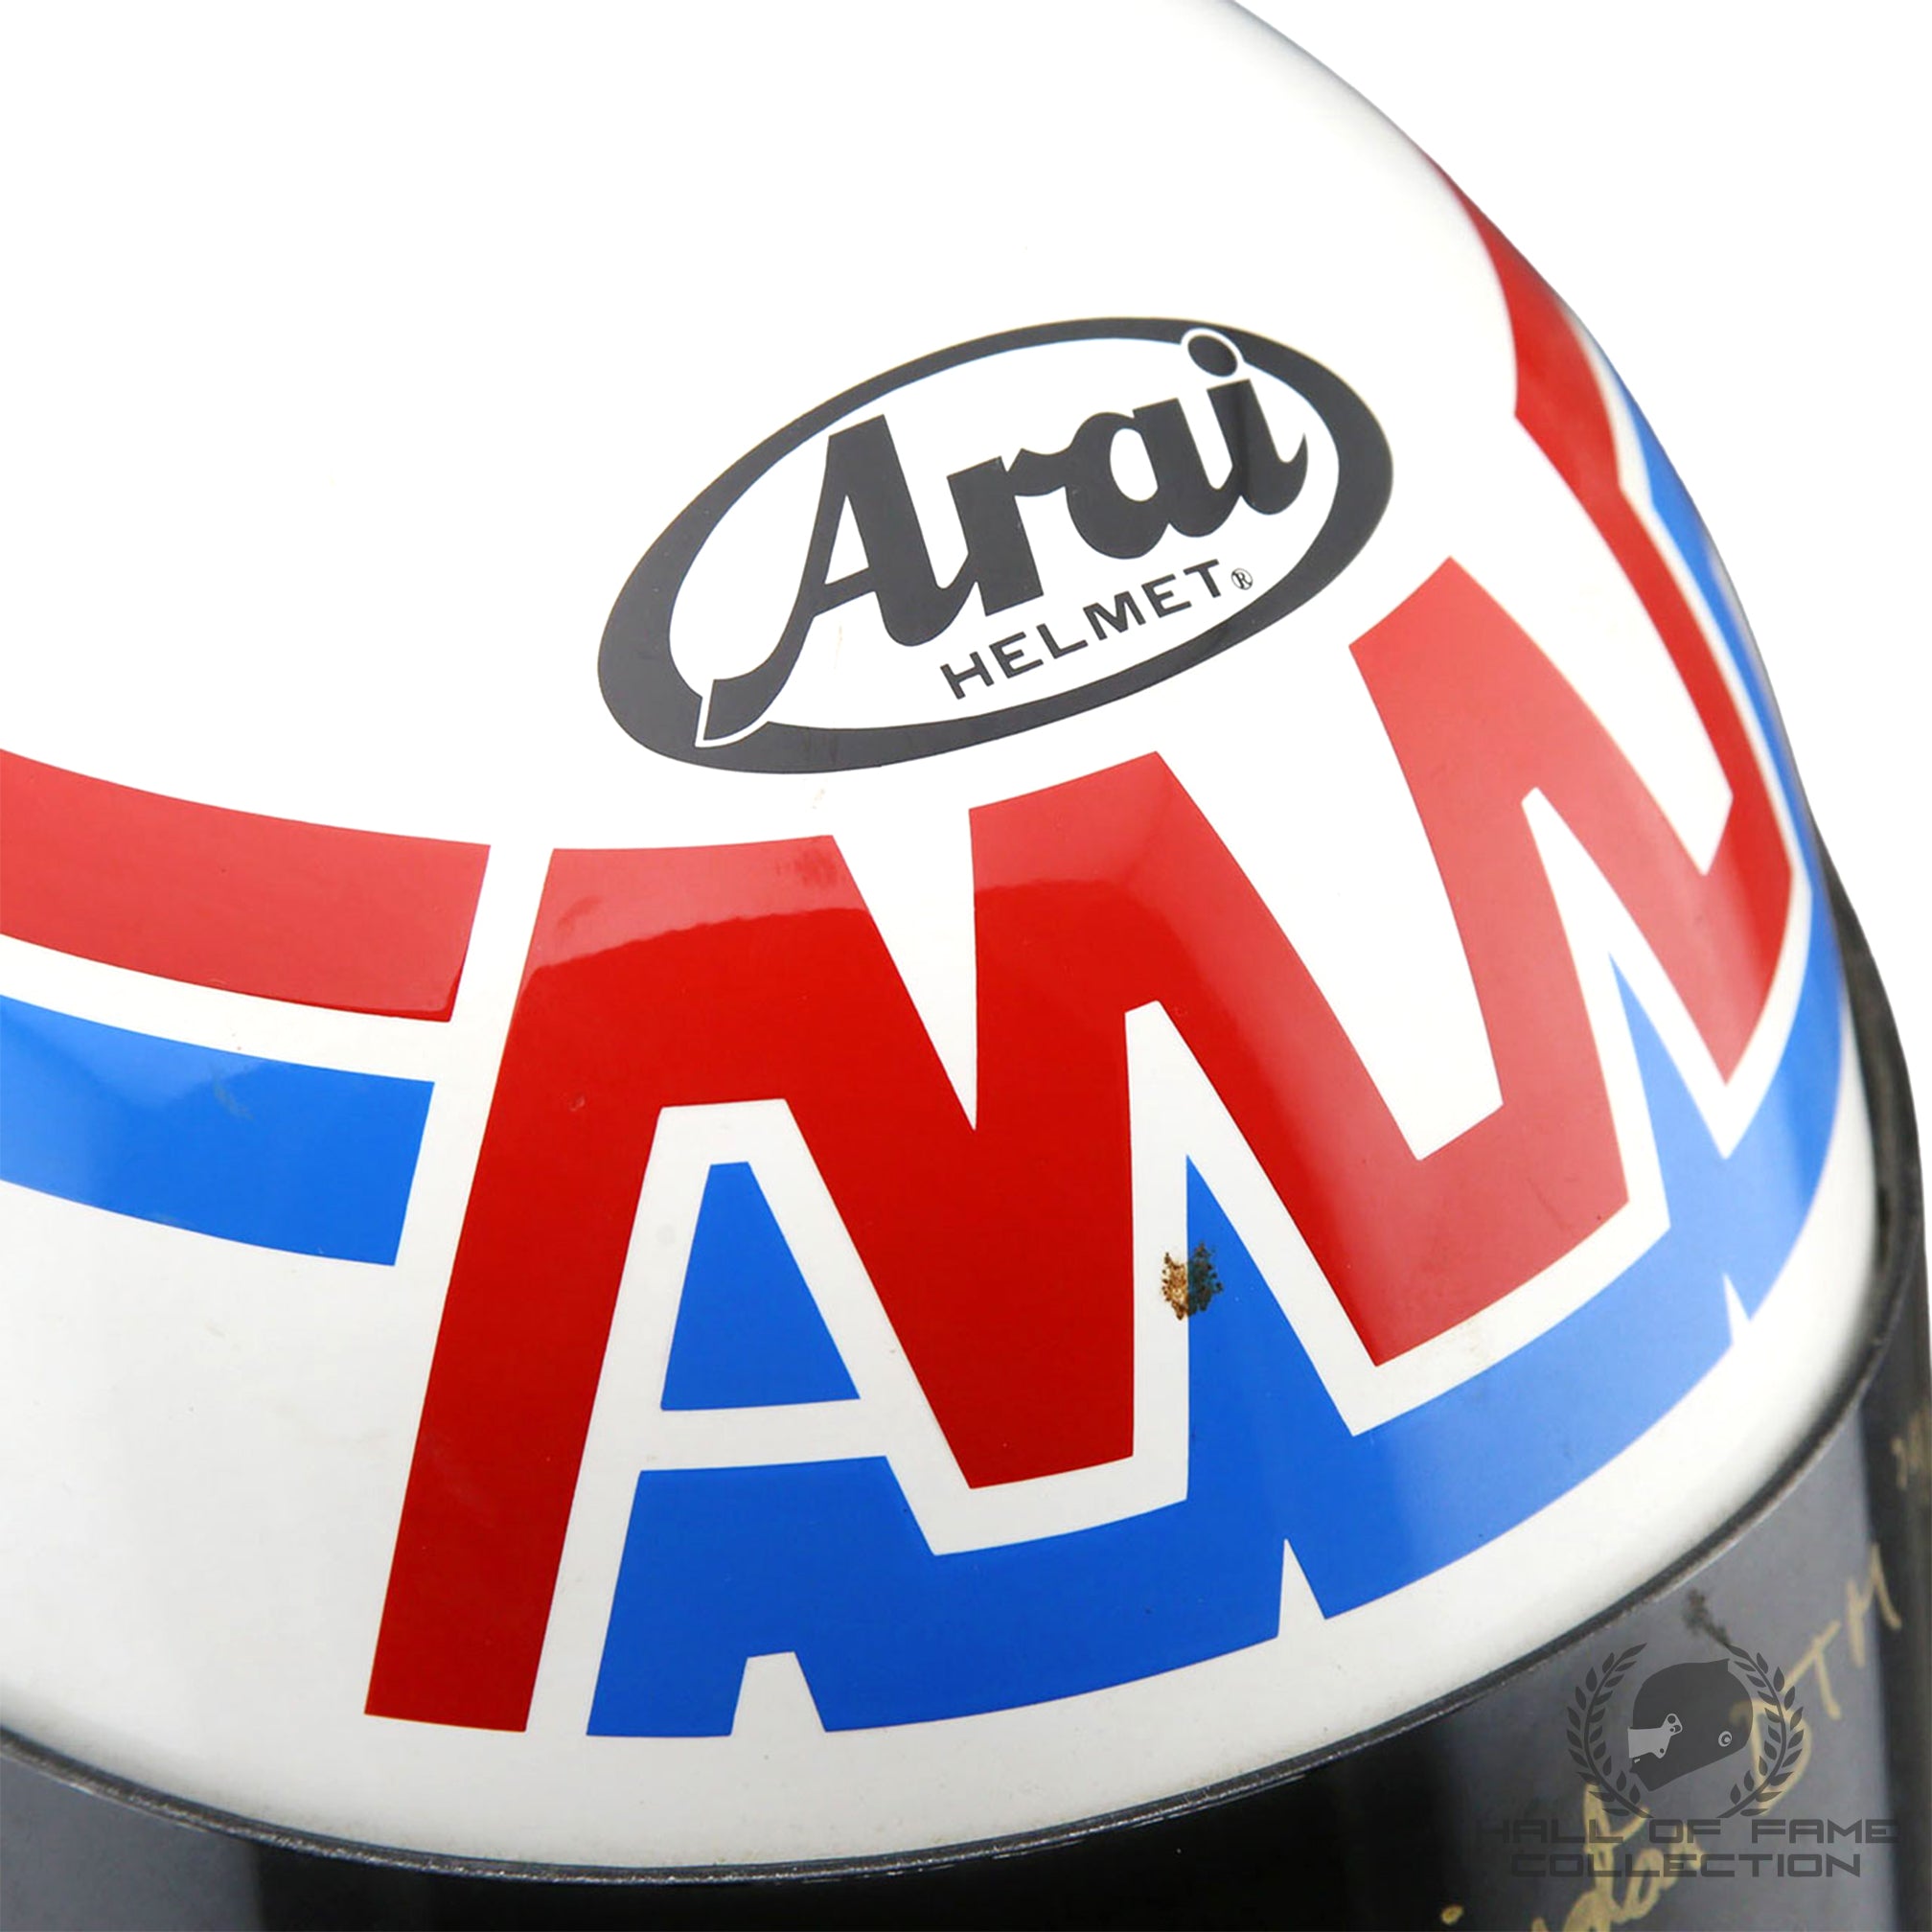 1994 Andy Wallace Signed Donington Park Race Used Schubel Engineering DTM Helmet